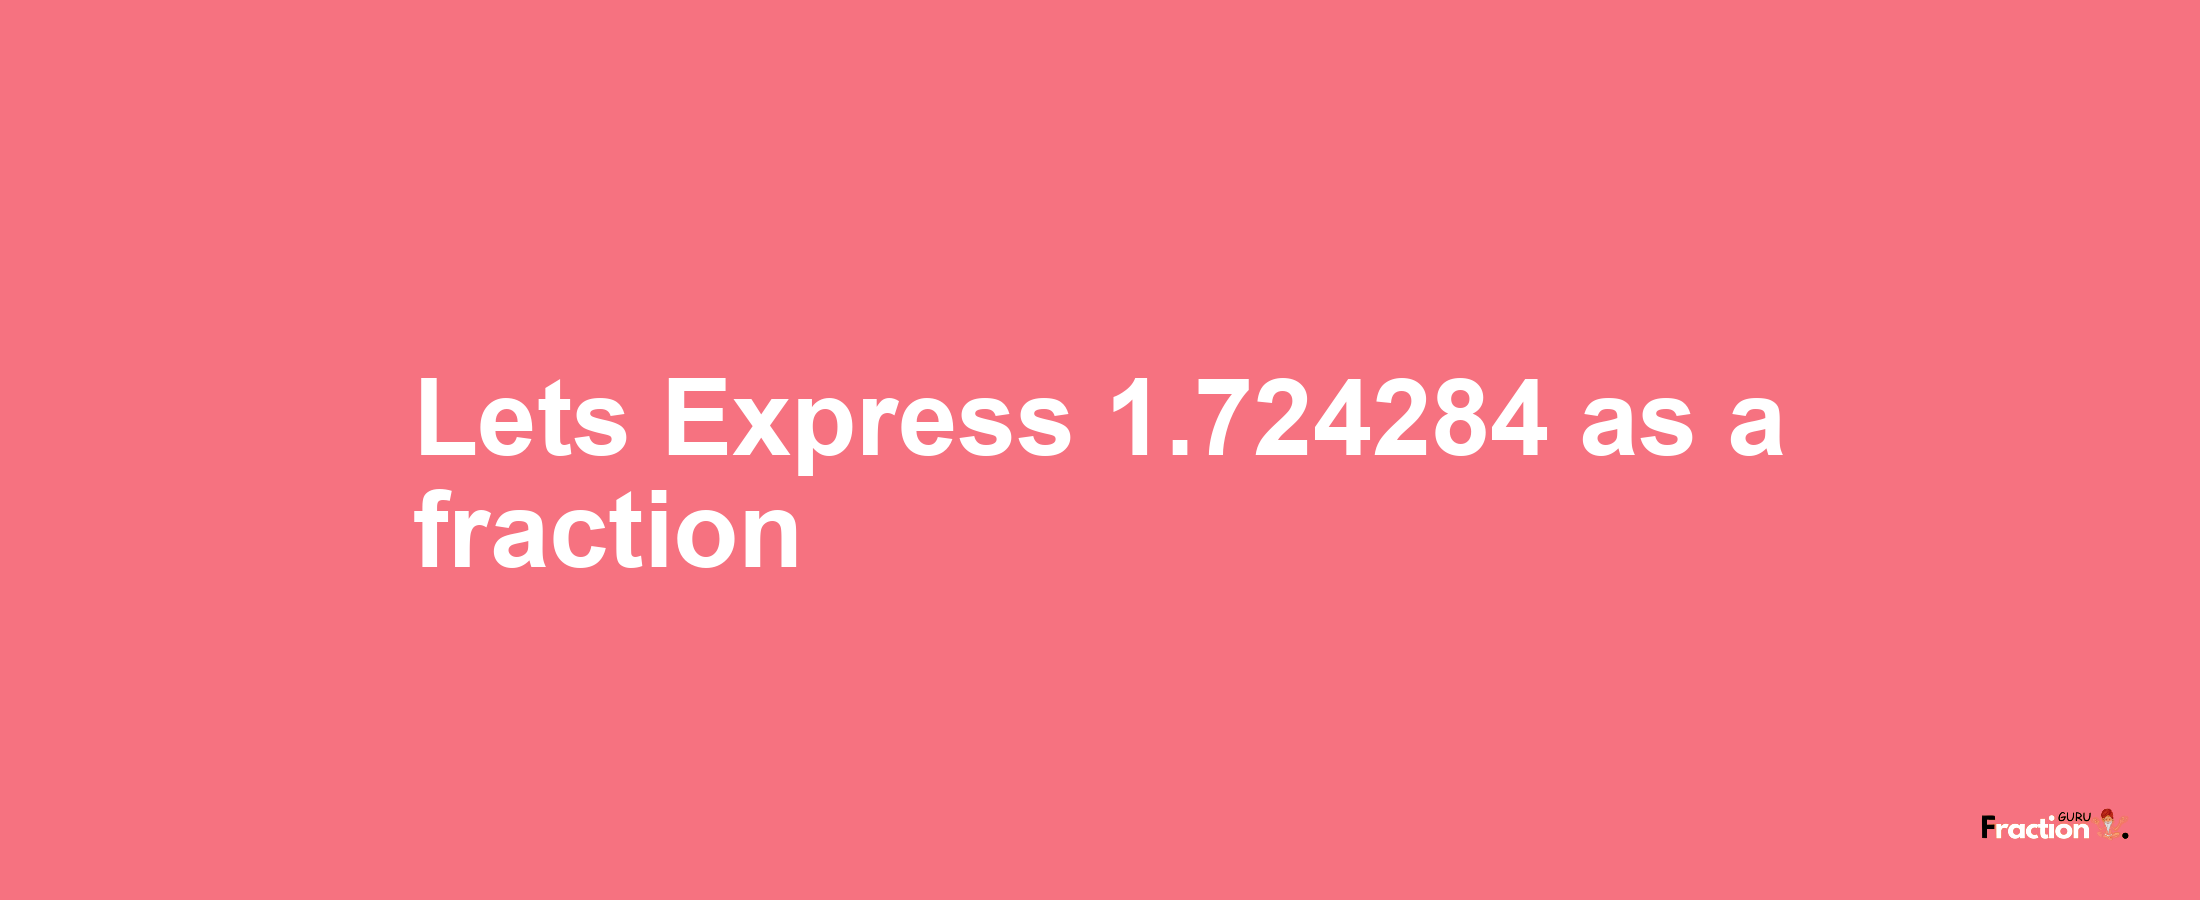 Lets Express 1.724284 as afraction